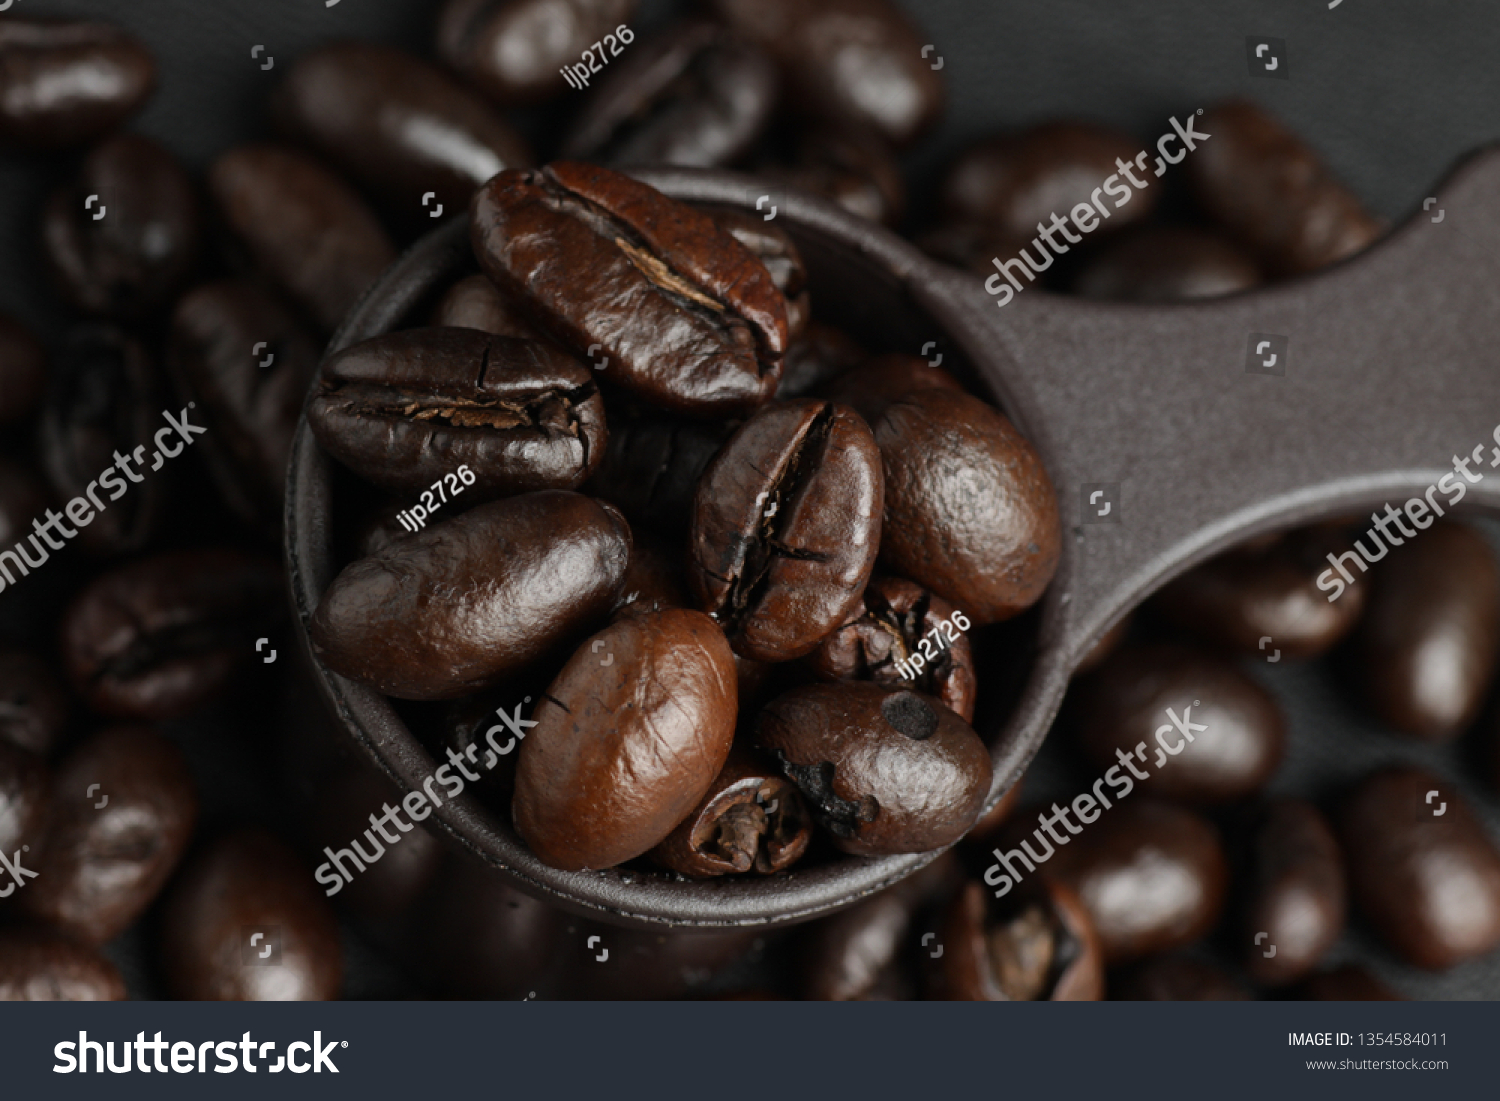 Dark roasted robusta coffee beans on a measuring spoon #1354584011